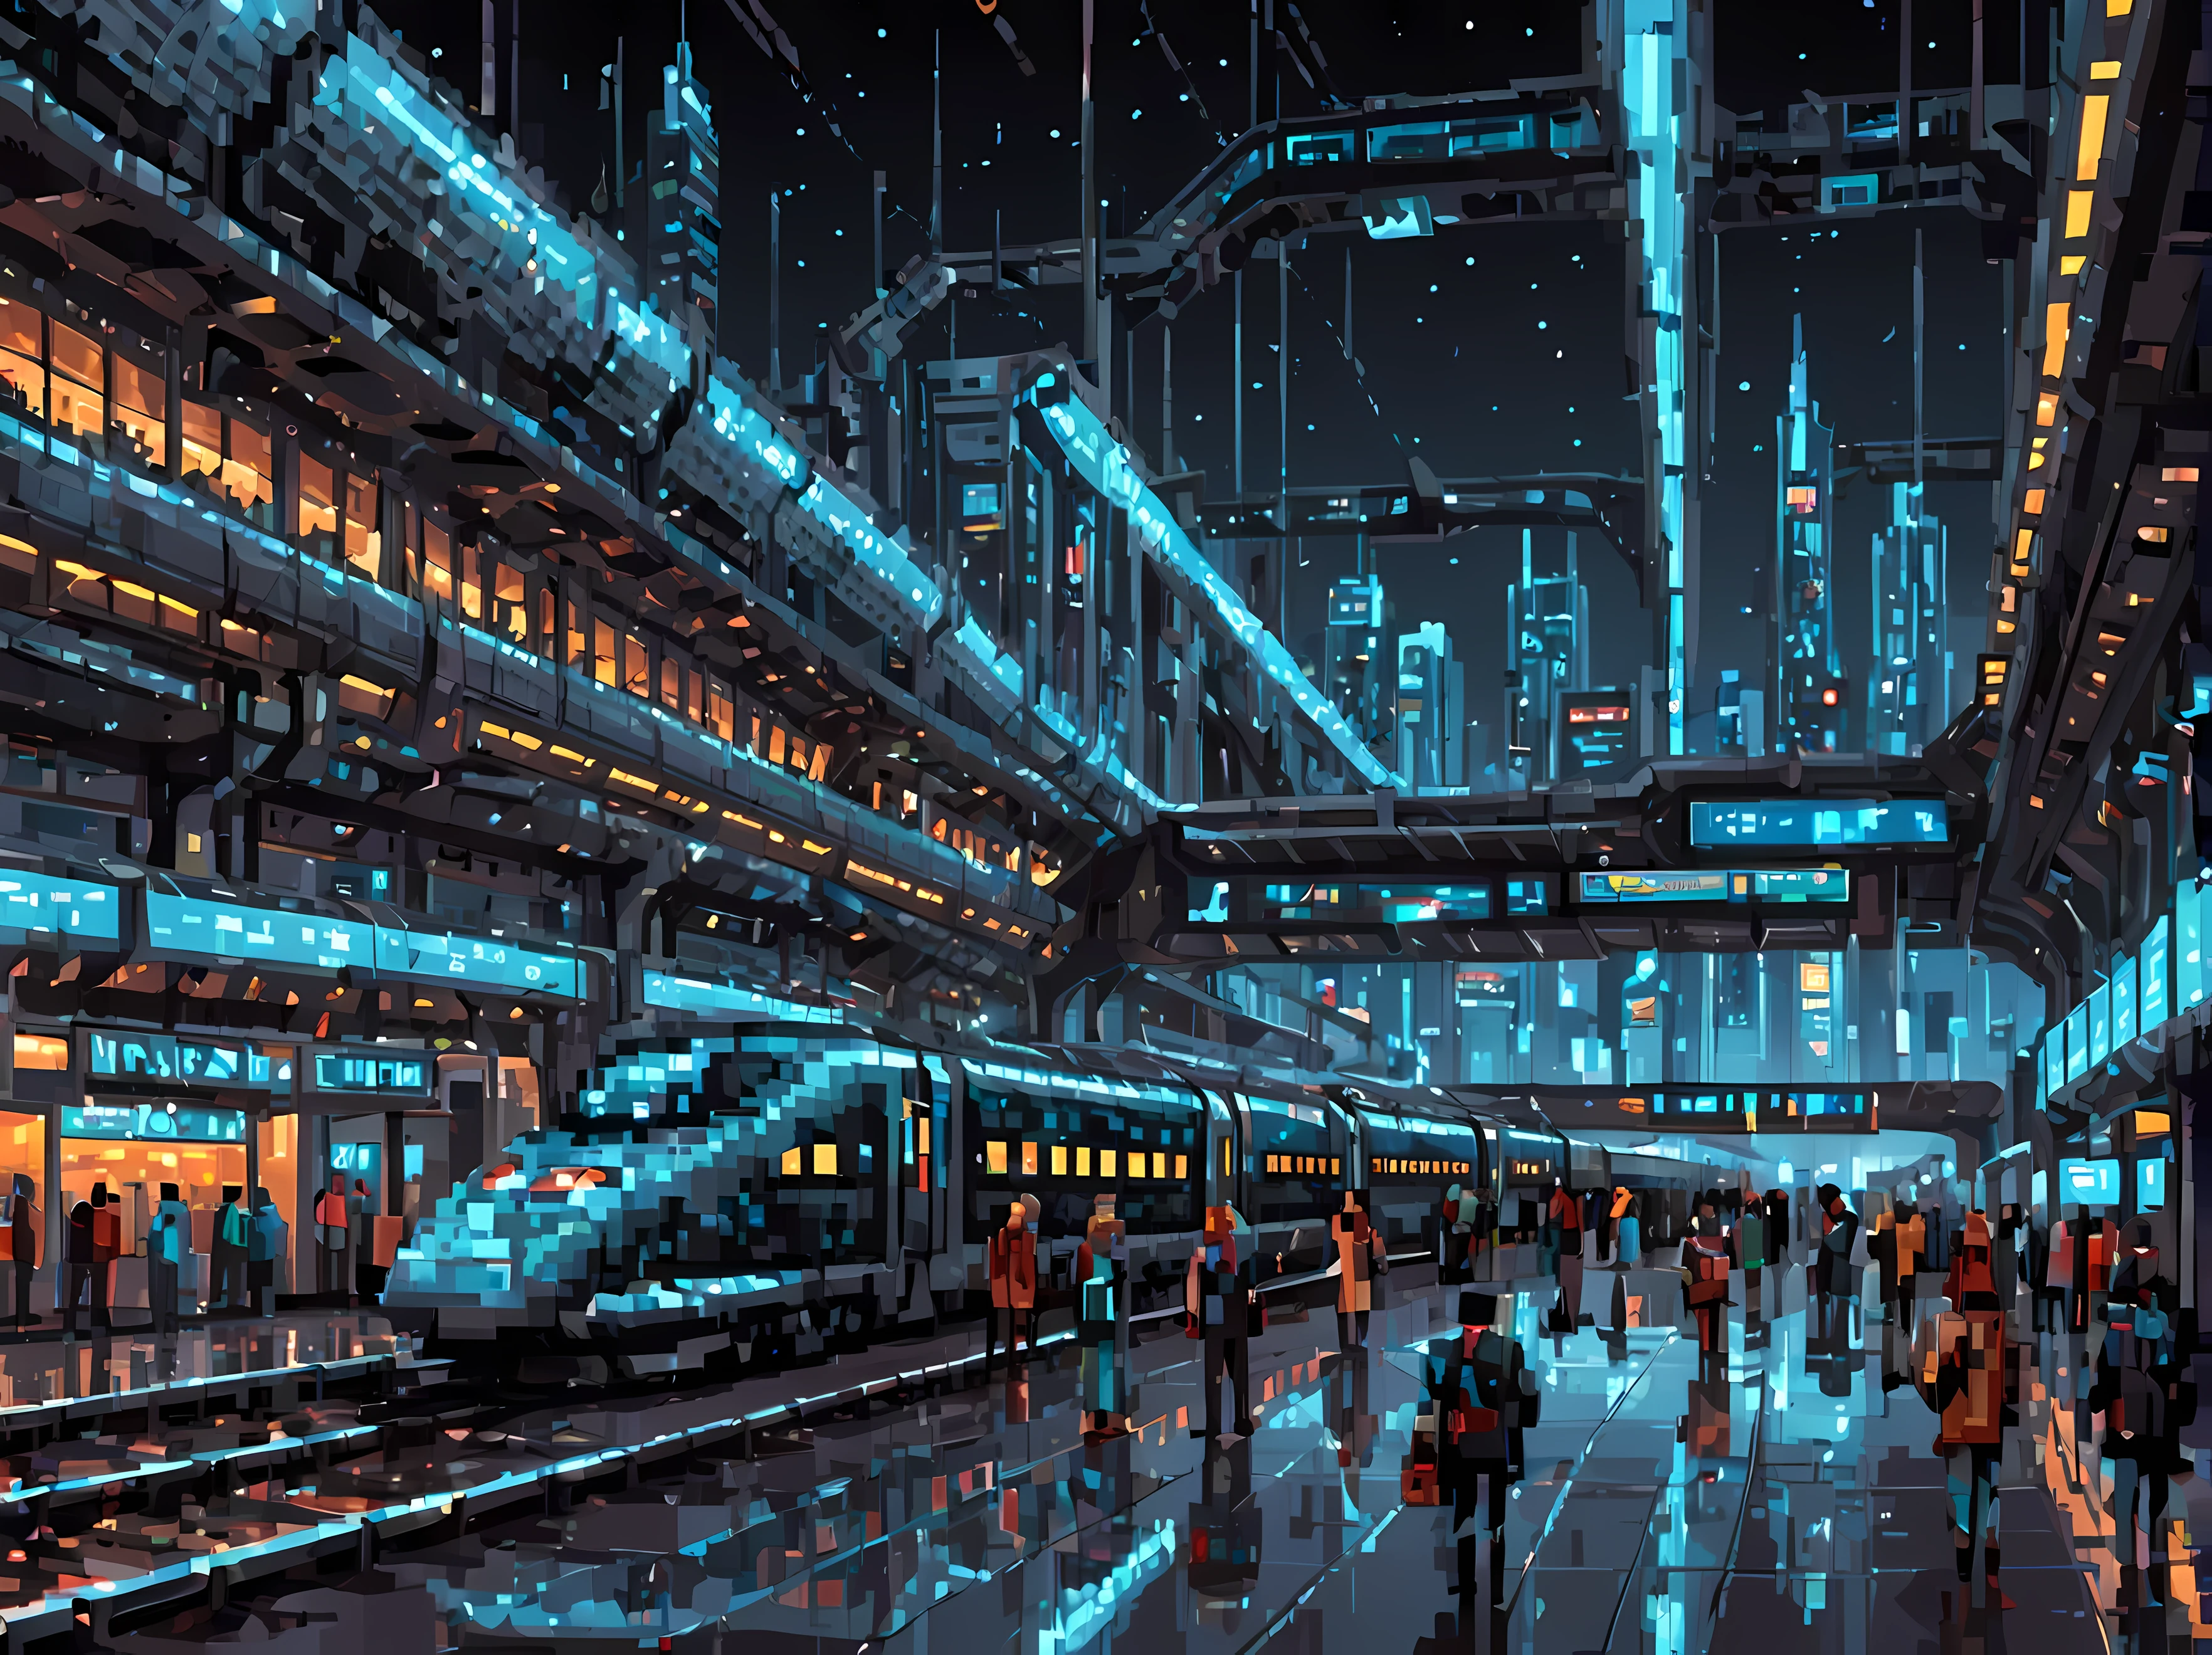 Pixel art, a captivating scene featuring a futuristic train station, sleek modern, architecture with transparent glass panels, a high-speed train, advanced technological elements like holographic displays and robotic assistants, a futuristic cityscape backdrop, cyberpunk passengers, masterpiece in maximum 16K resolution, superb quality. | ((More_Detail))